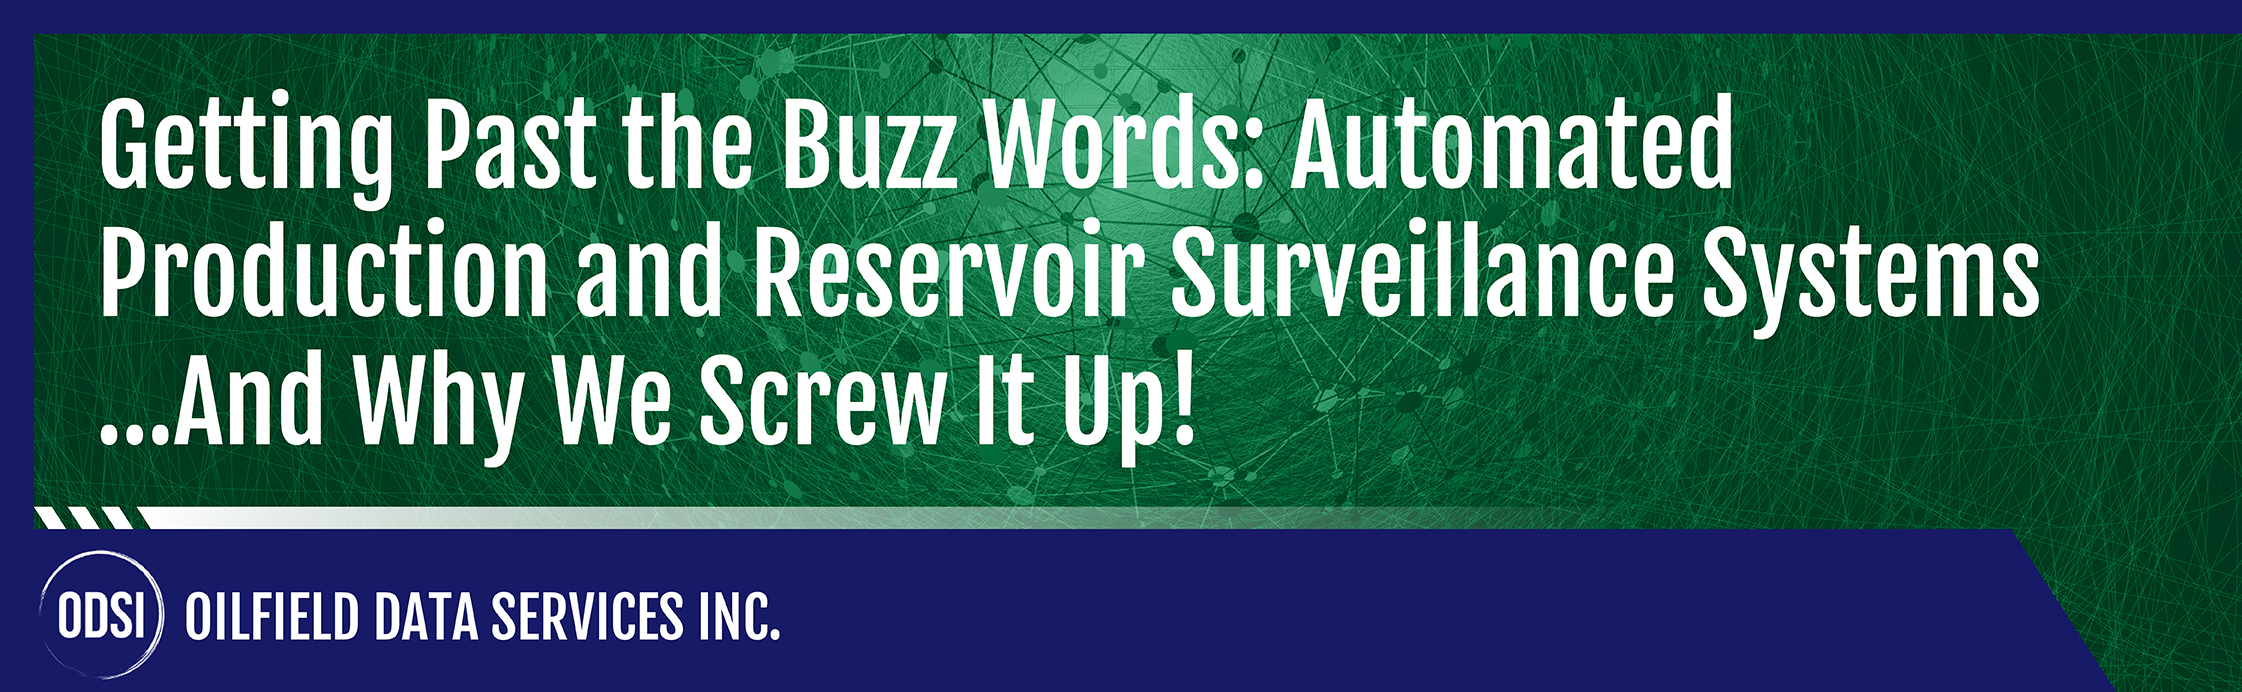 Getting Past the Buzz Words: Automated Production and Reservoir Surveillance Systems... And Why We Screw It Up!